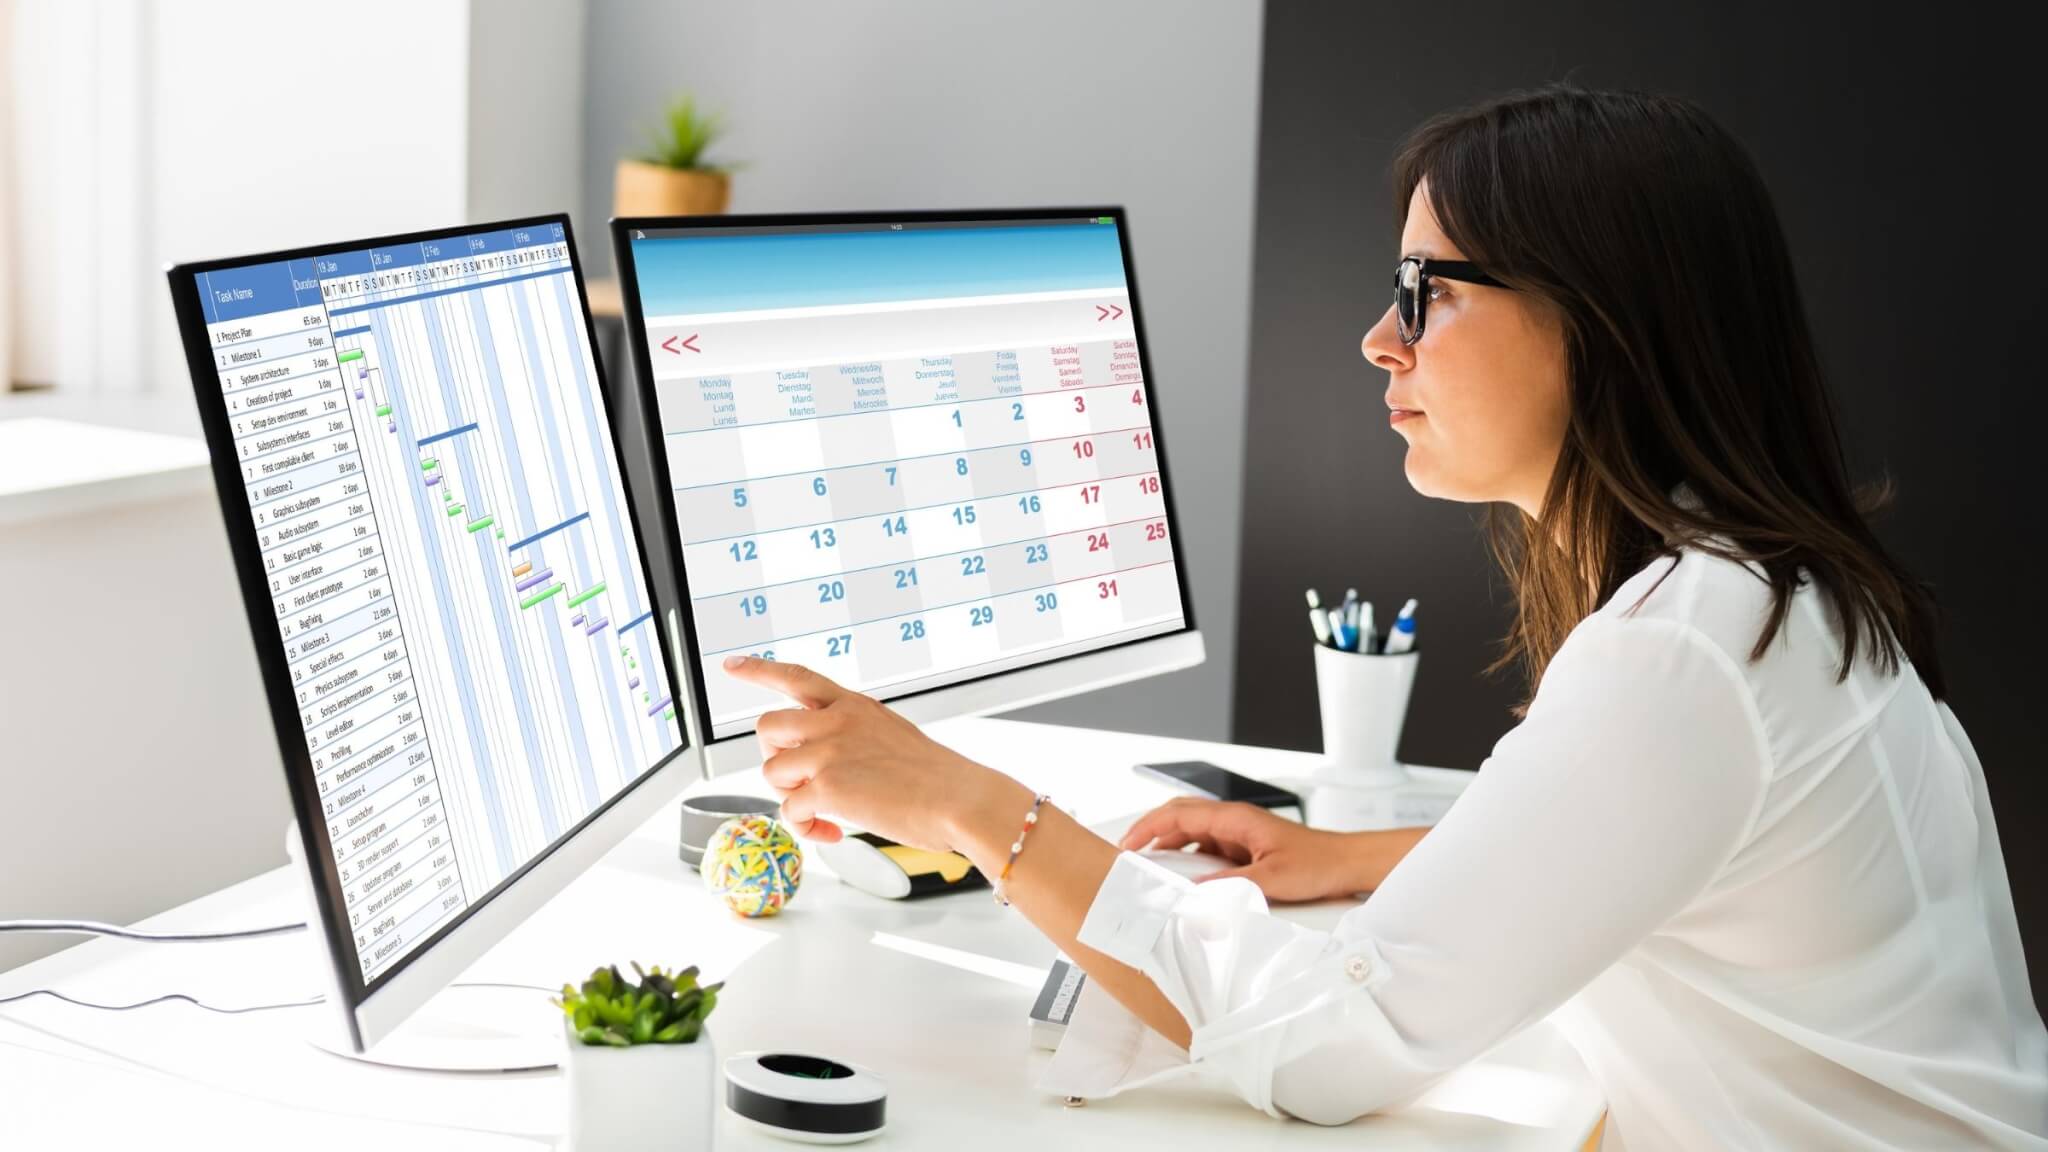 11 Tips to Manage Your Calendar Like a Pro